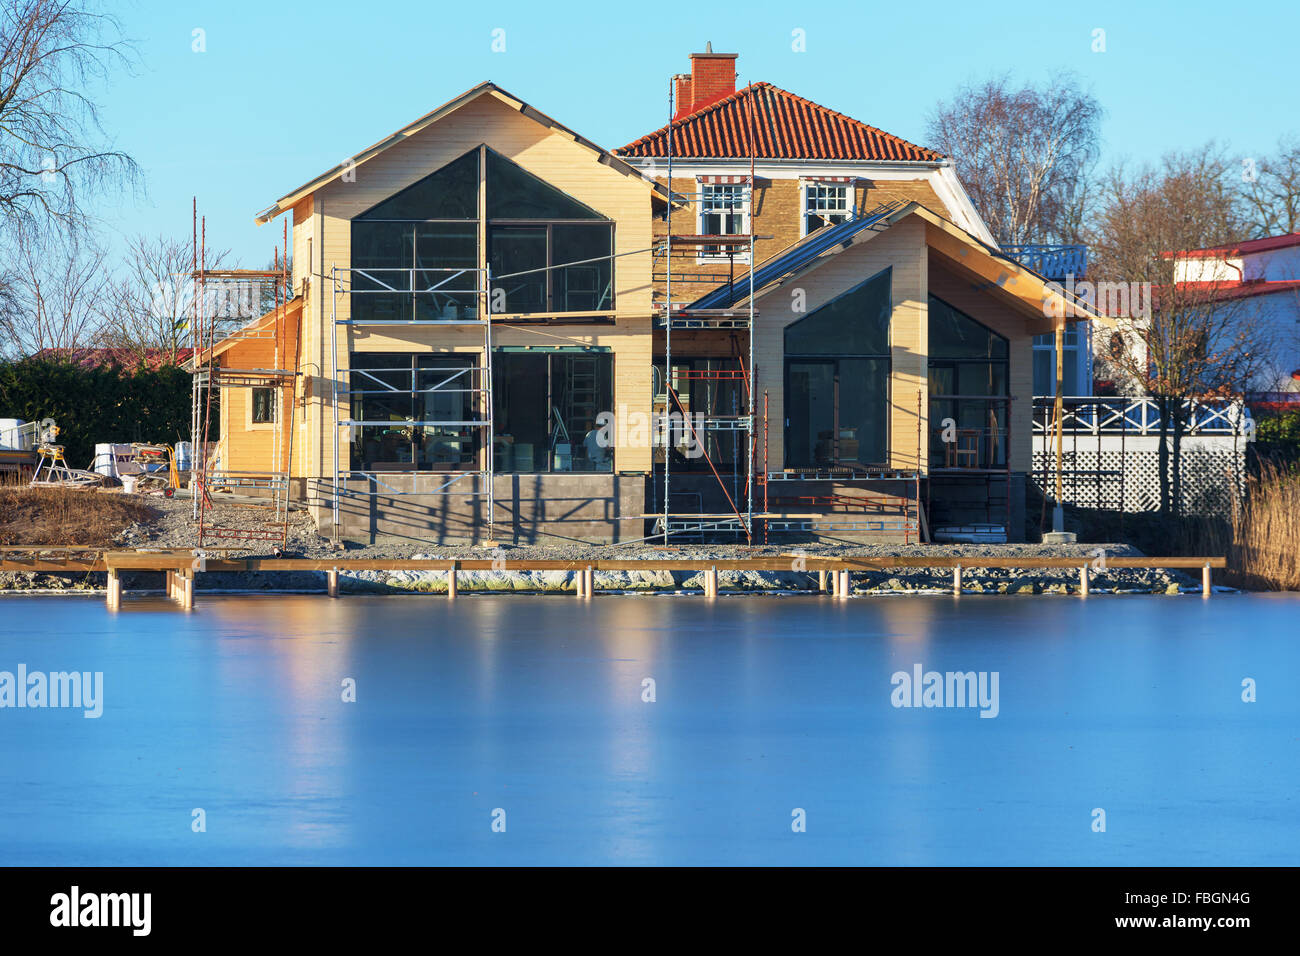 Karlskrona, Sweden - January 13, 2016: A home construction site with an almost finished house. People inside are working. Close Stock Photo